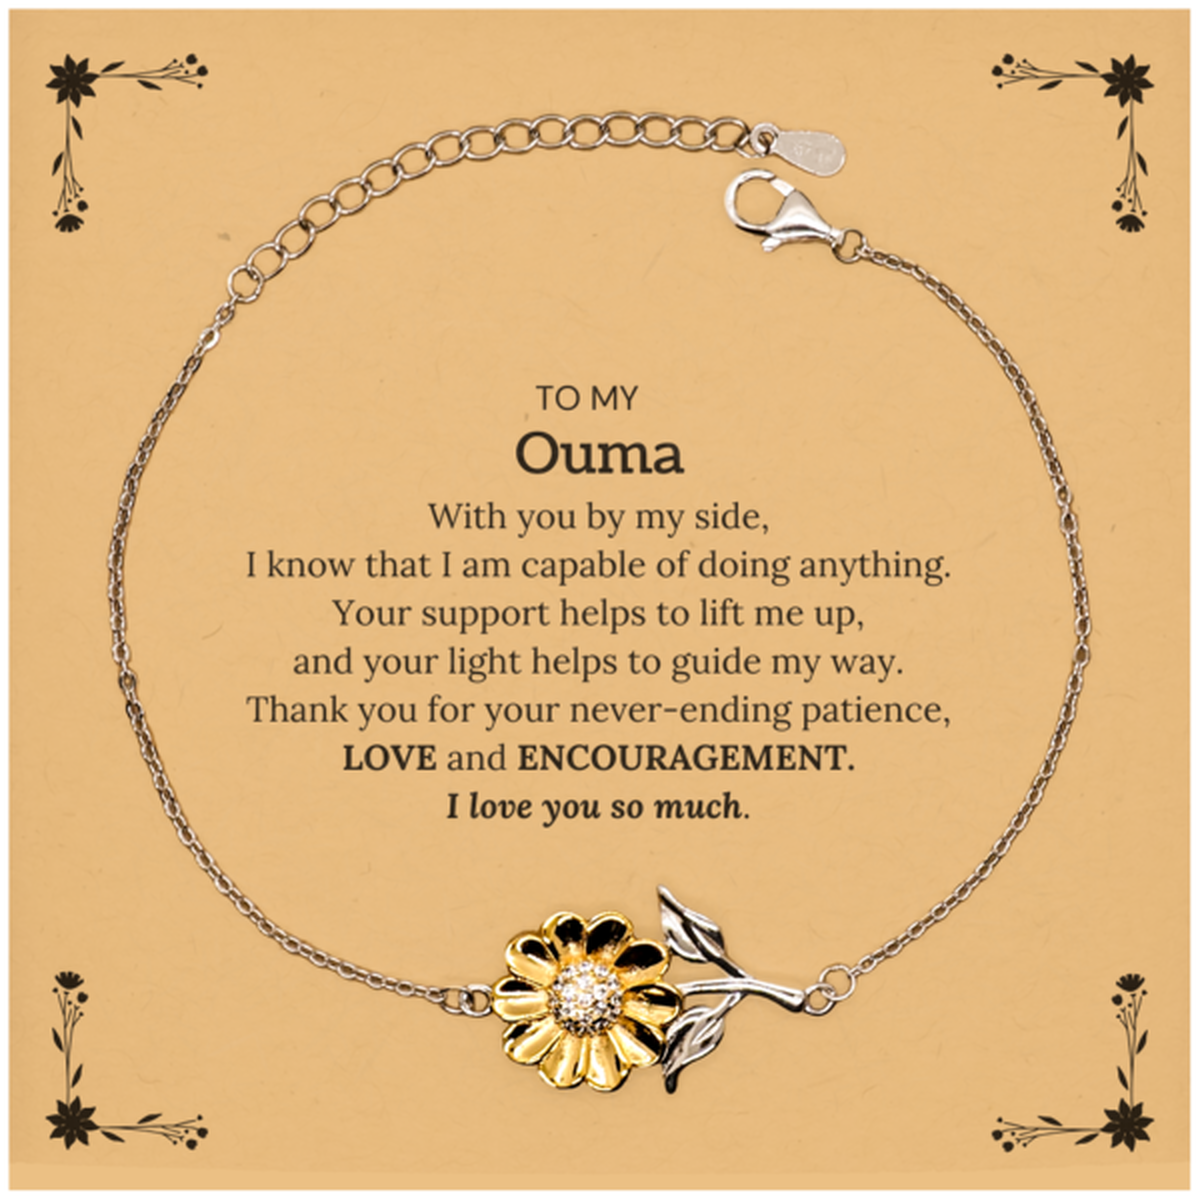 Appreciation Ouma Sunflower Bracelet Gifts, To My Ouma Birthday Christmas Wedding Keepsake Gifts for Ouma With you by my side, I know that I am capable of doing anything. I love you so much